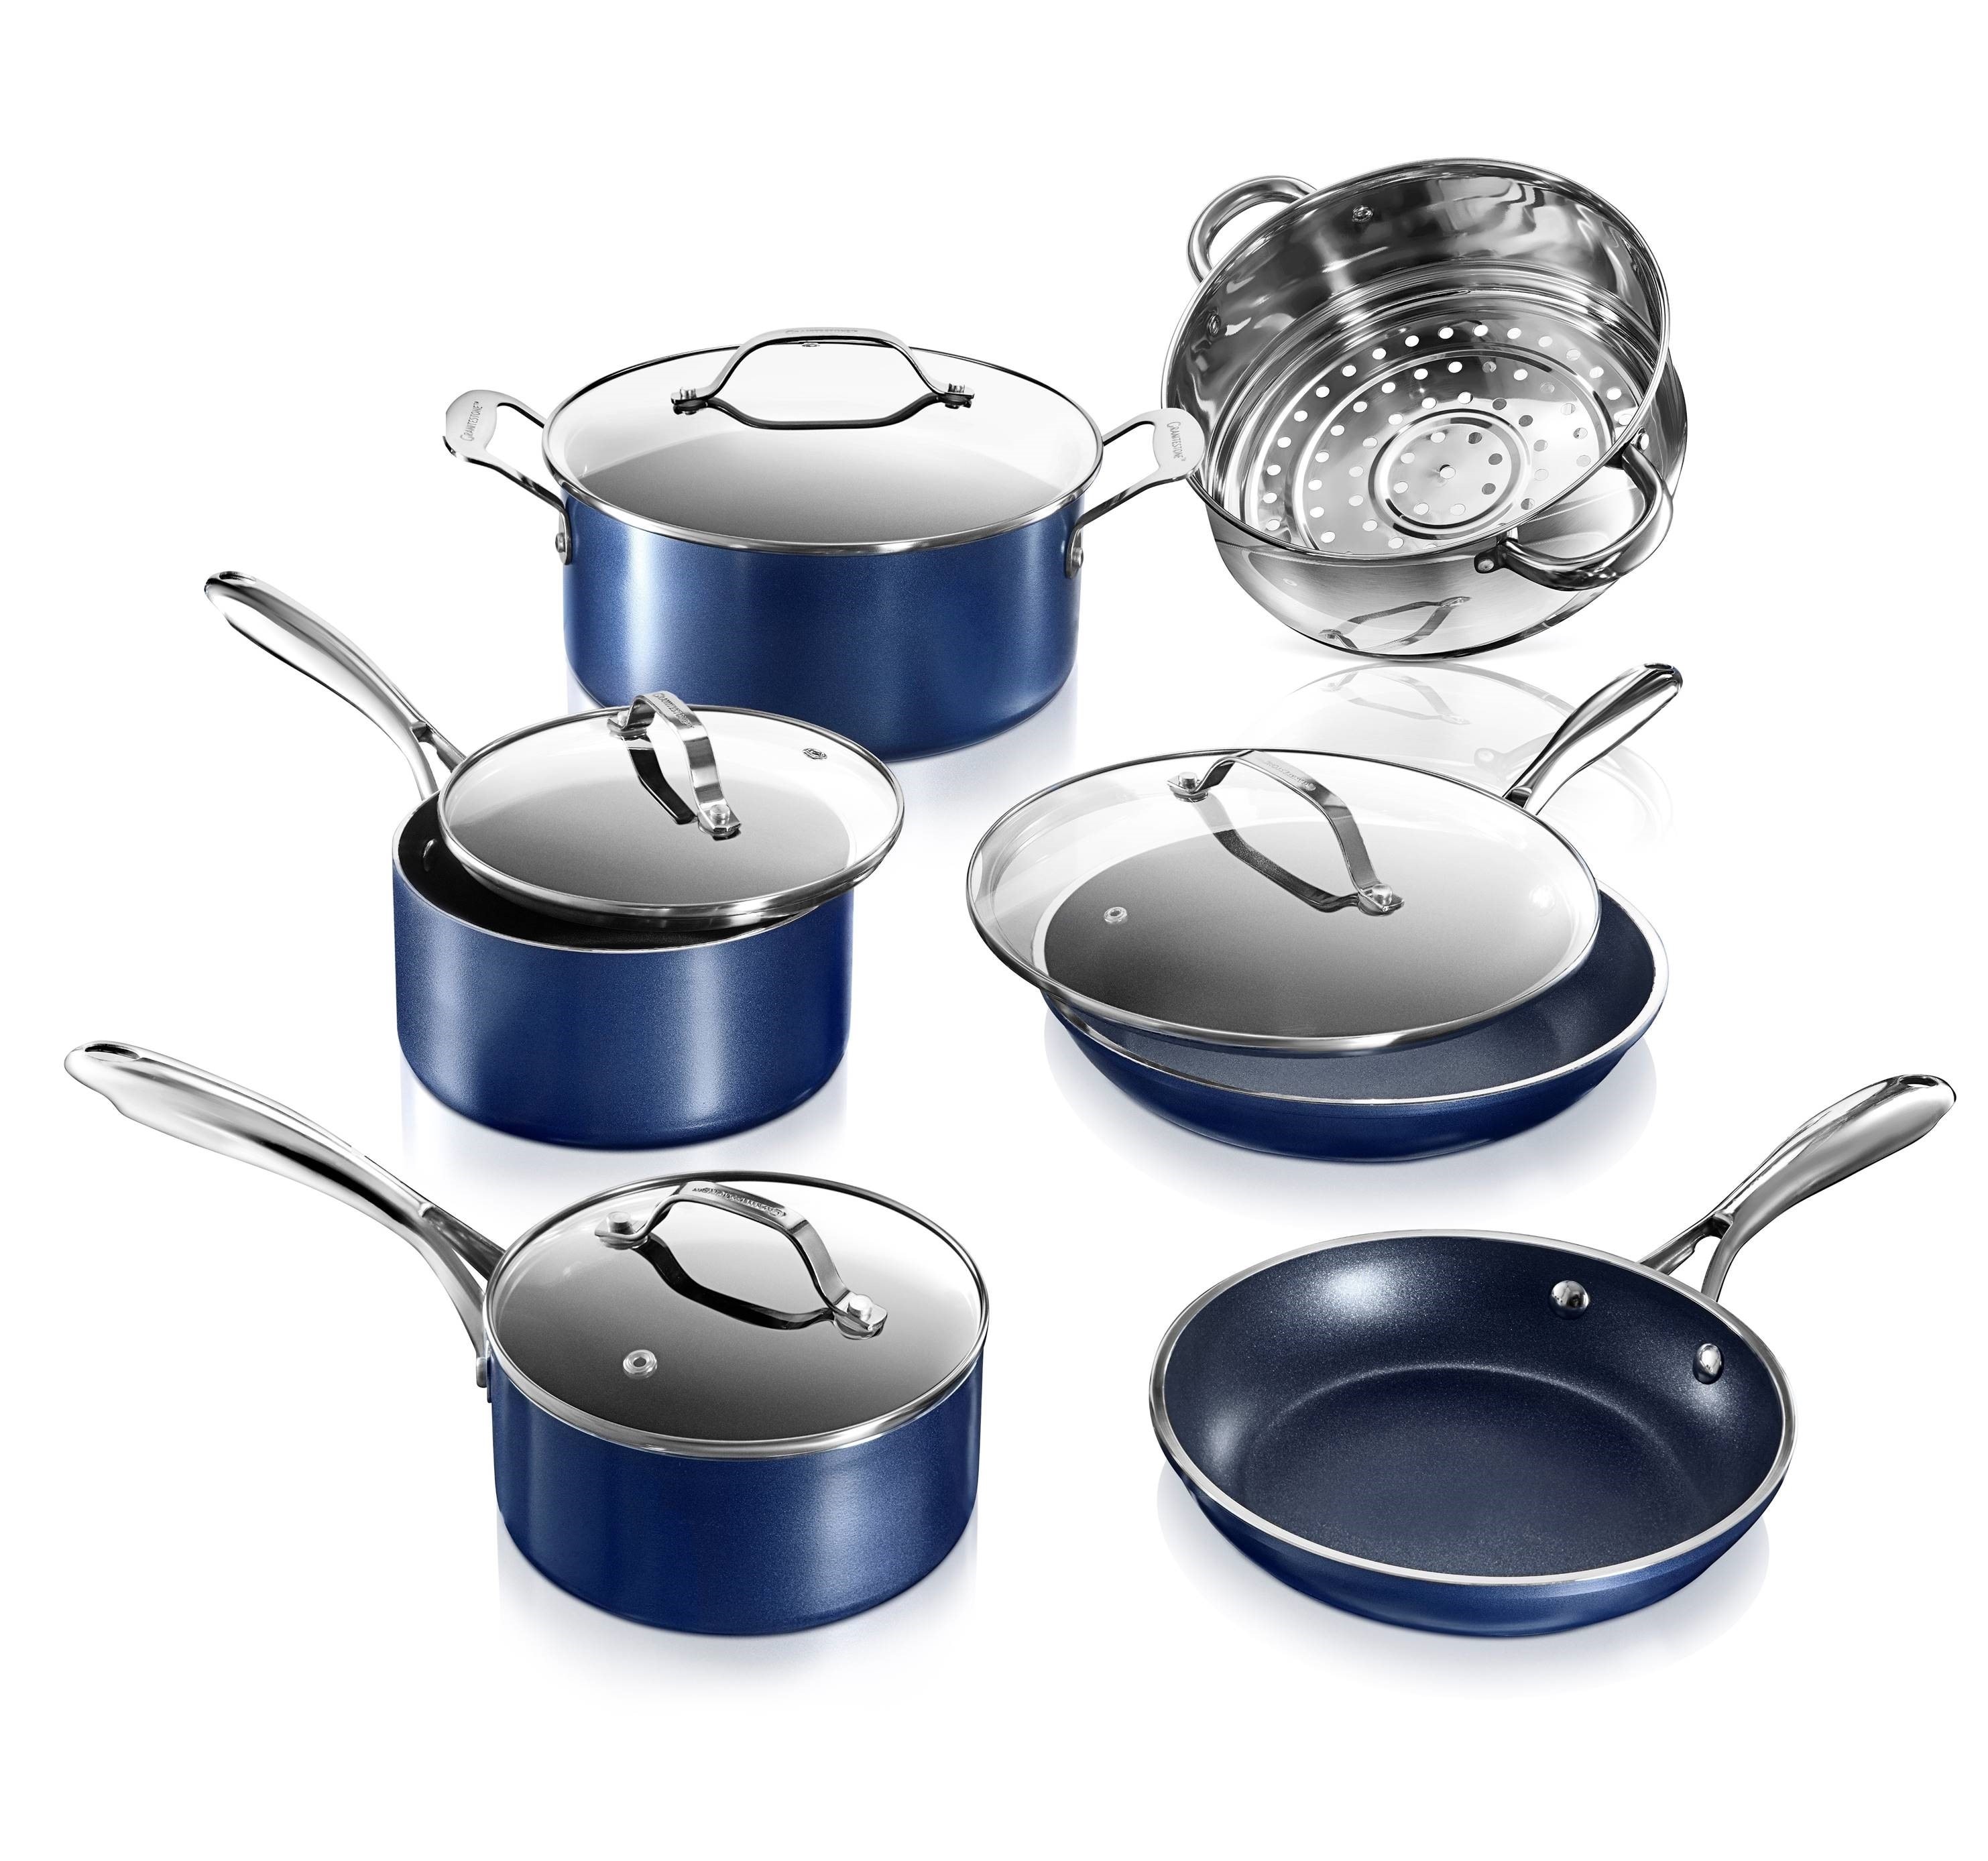 Ultimate Stackmaster Cookware 10 Piece Set: Expertly Designed and Versatile